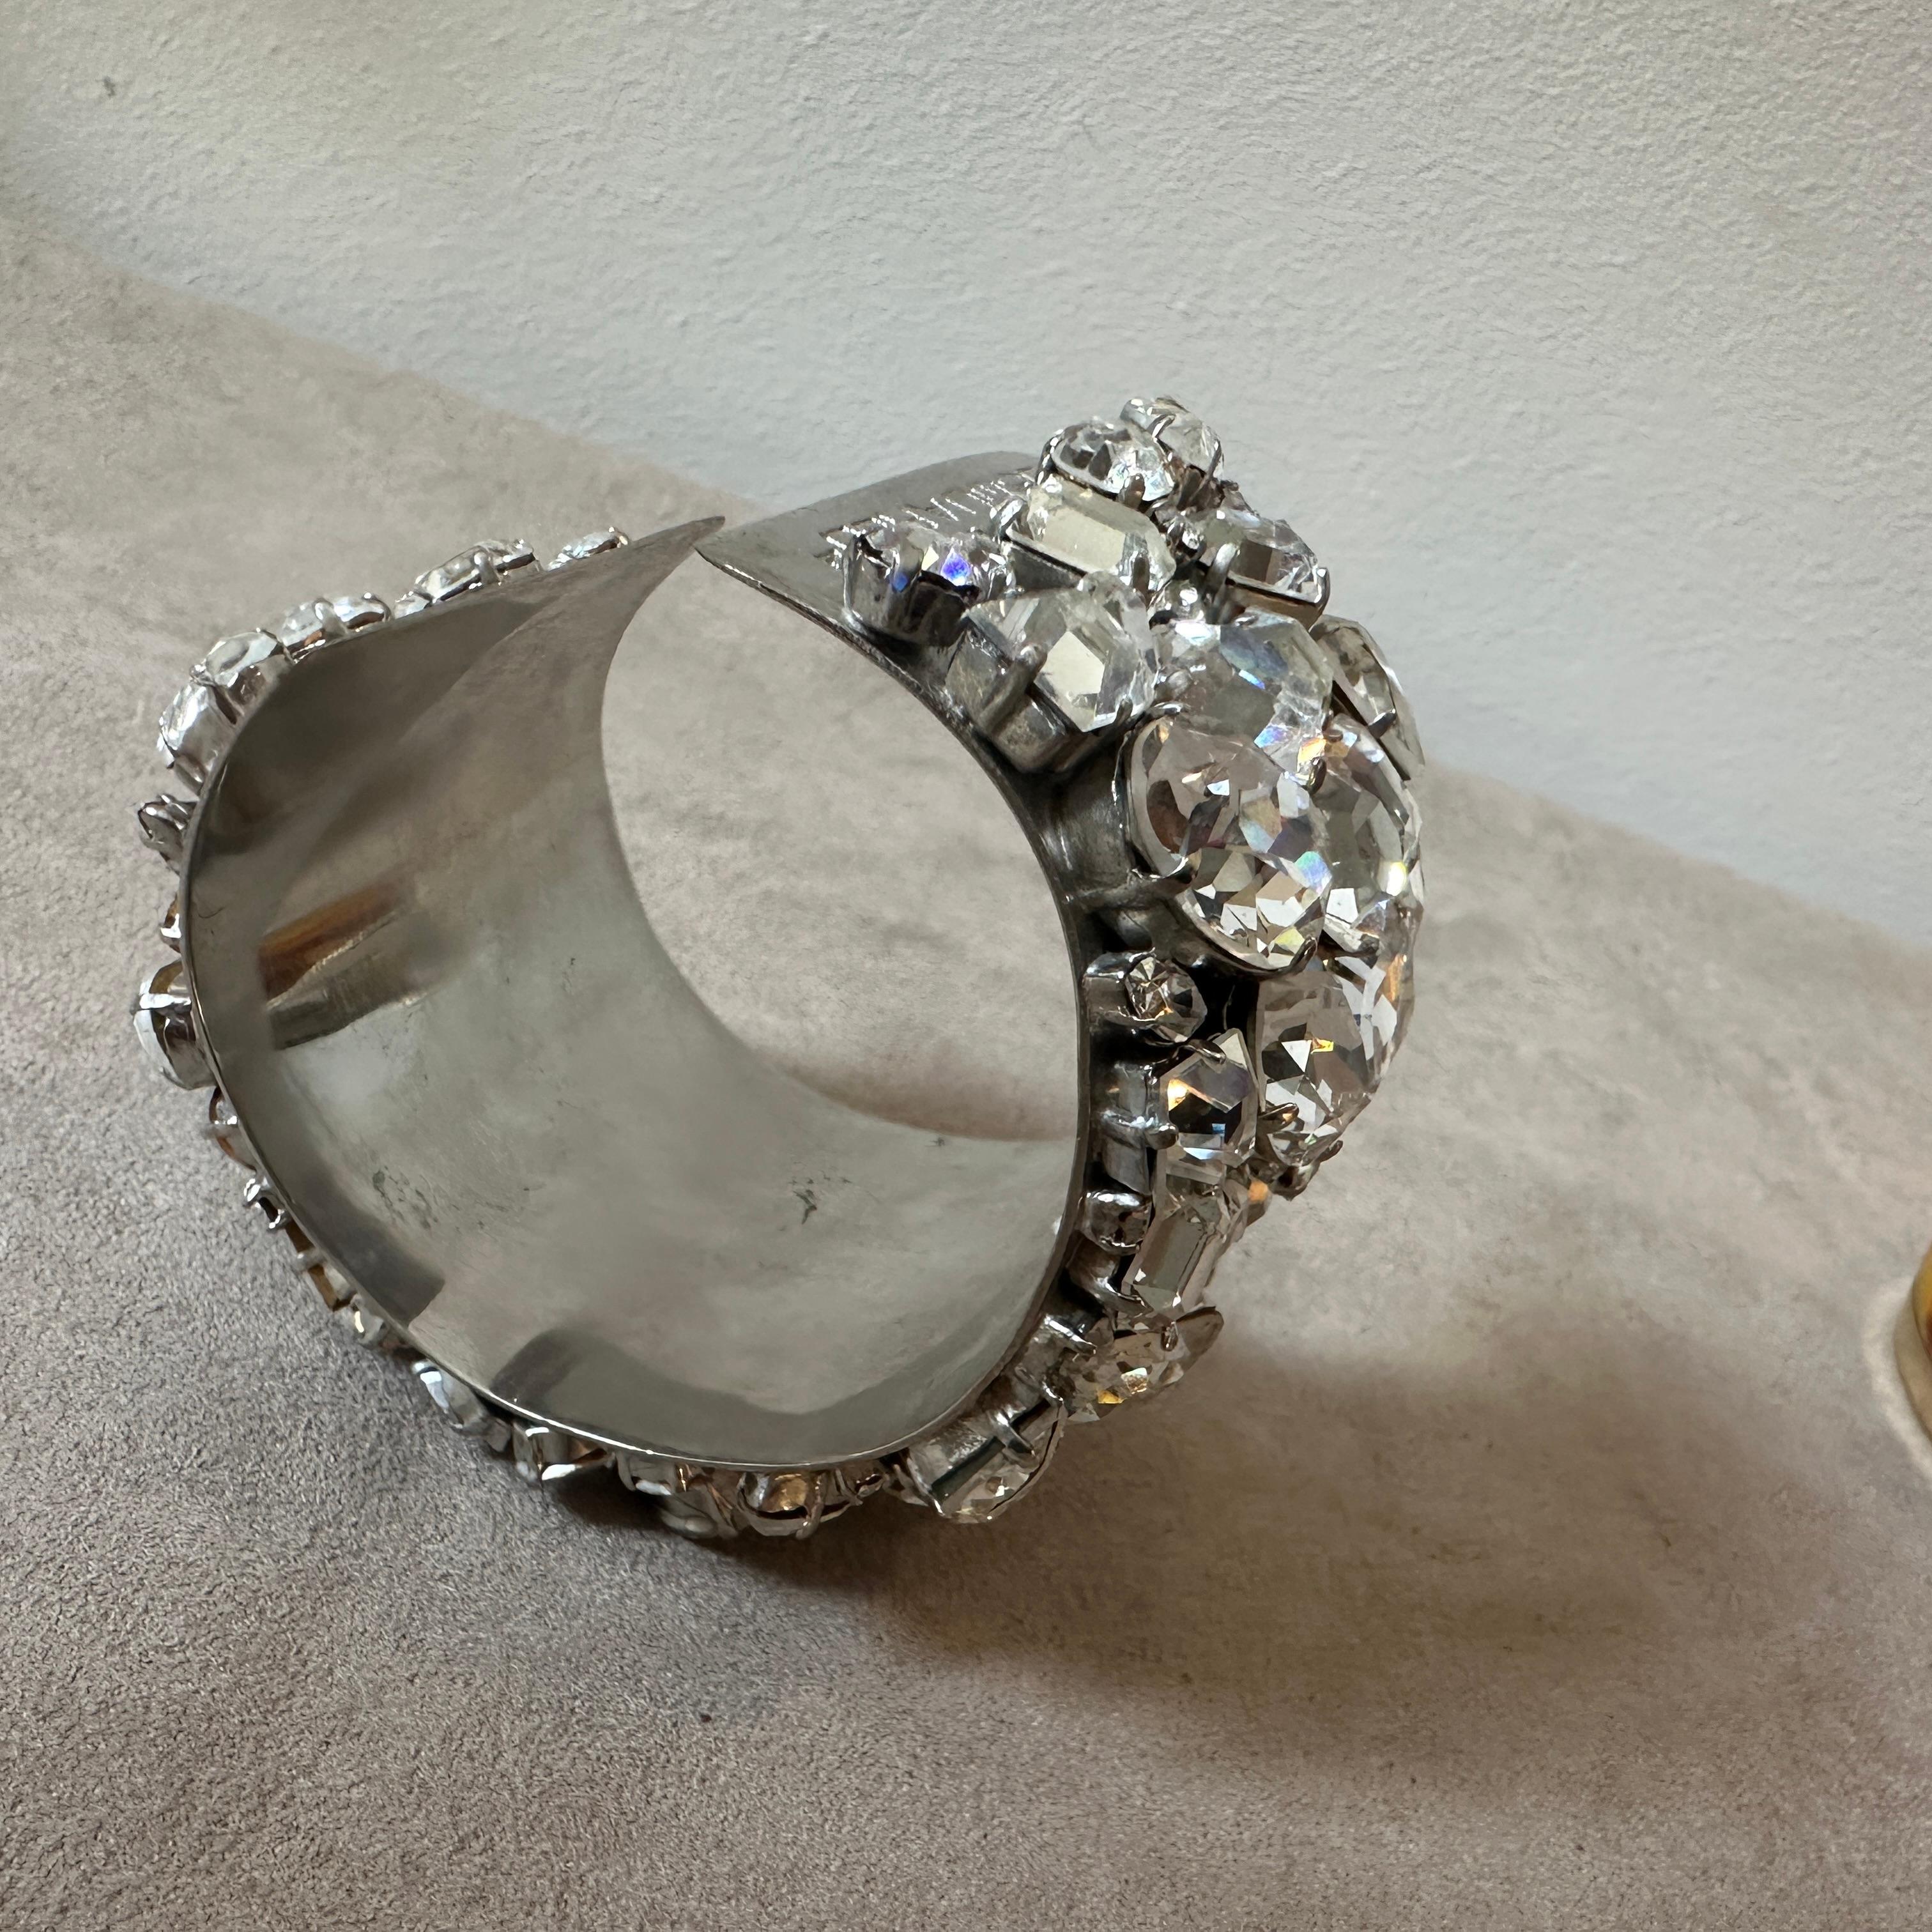 A Strass and Silvered Metal Italian Retro Bracelet By Dsquared2 For Sale 2